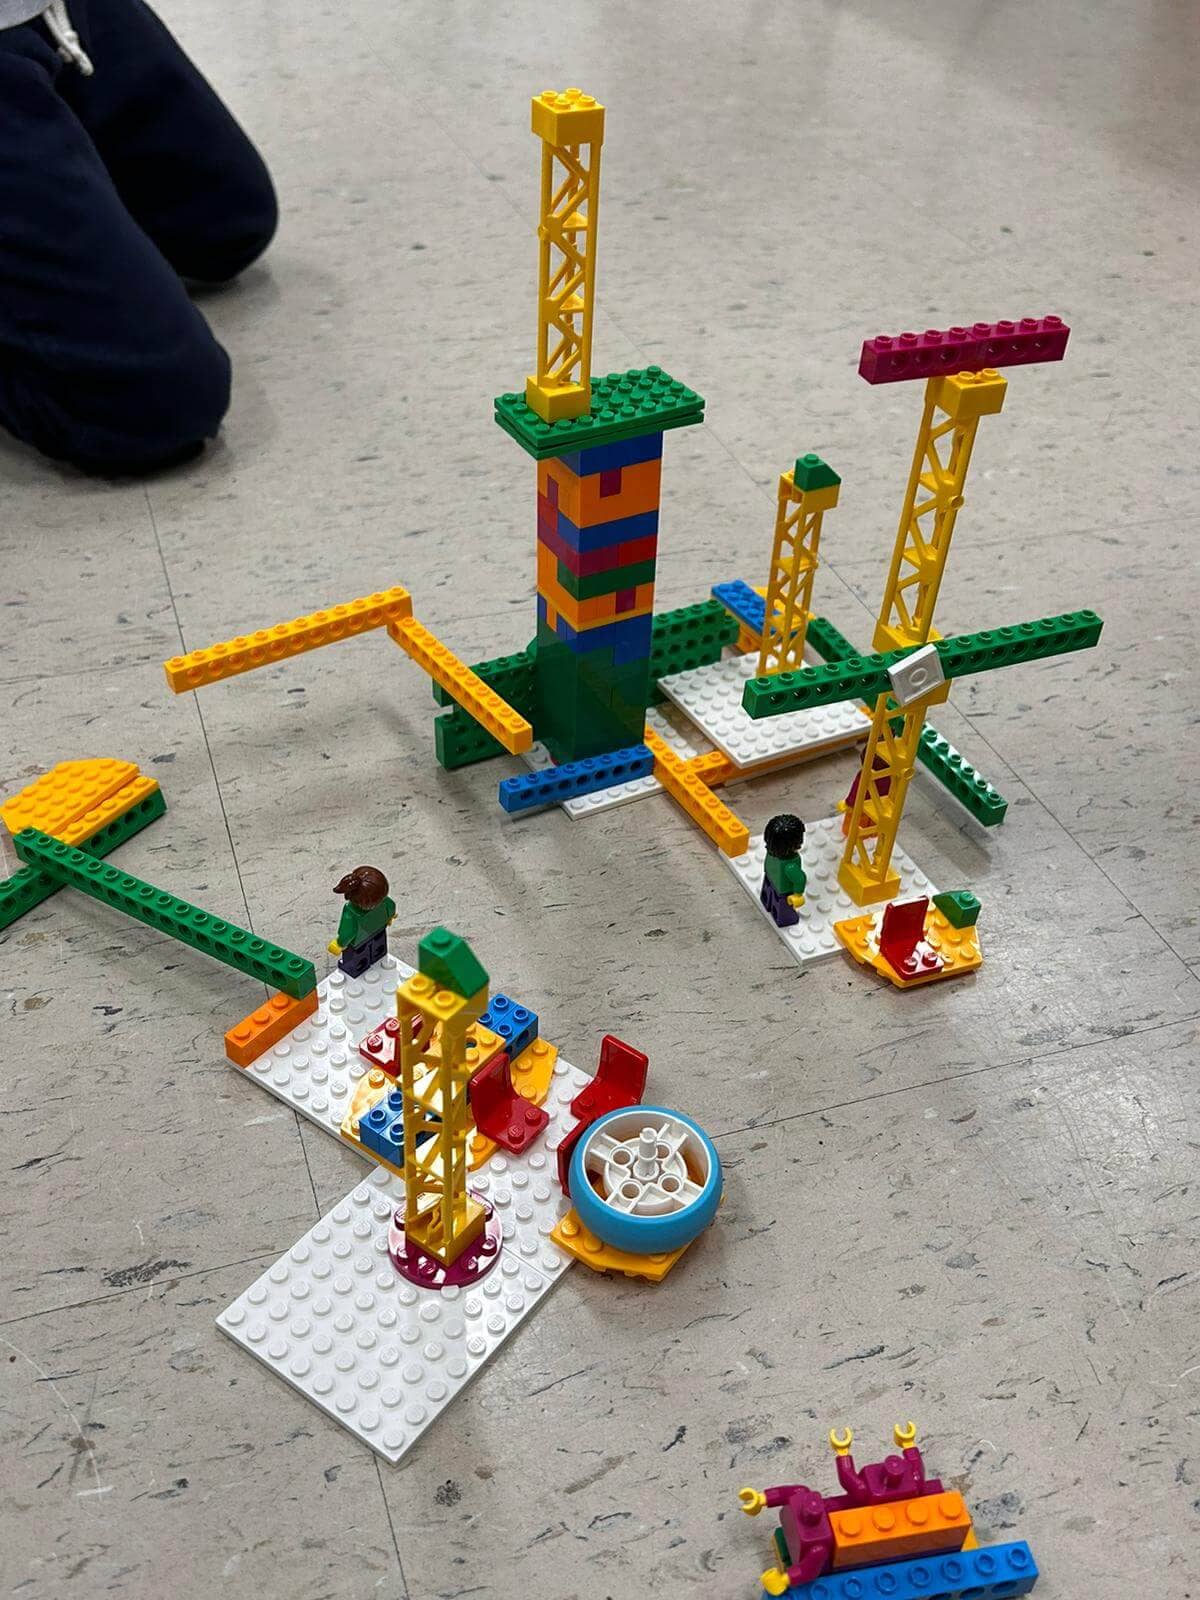 Engineering with legos at York - Enineering for kids